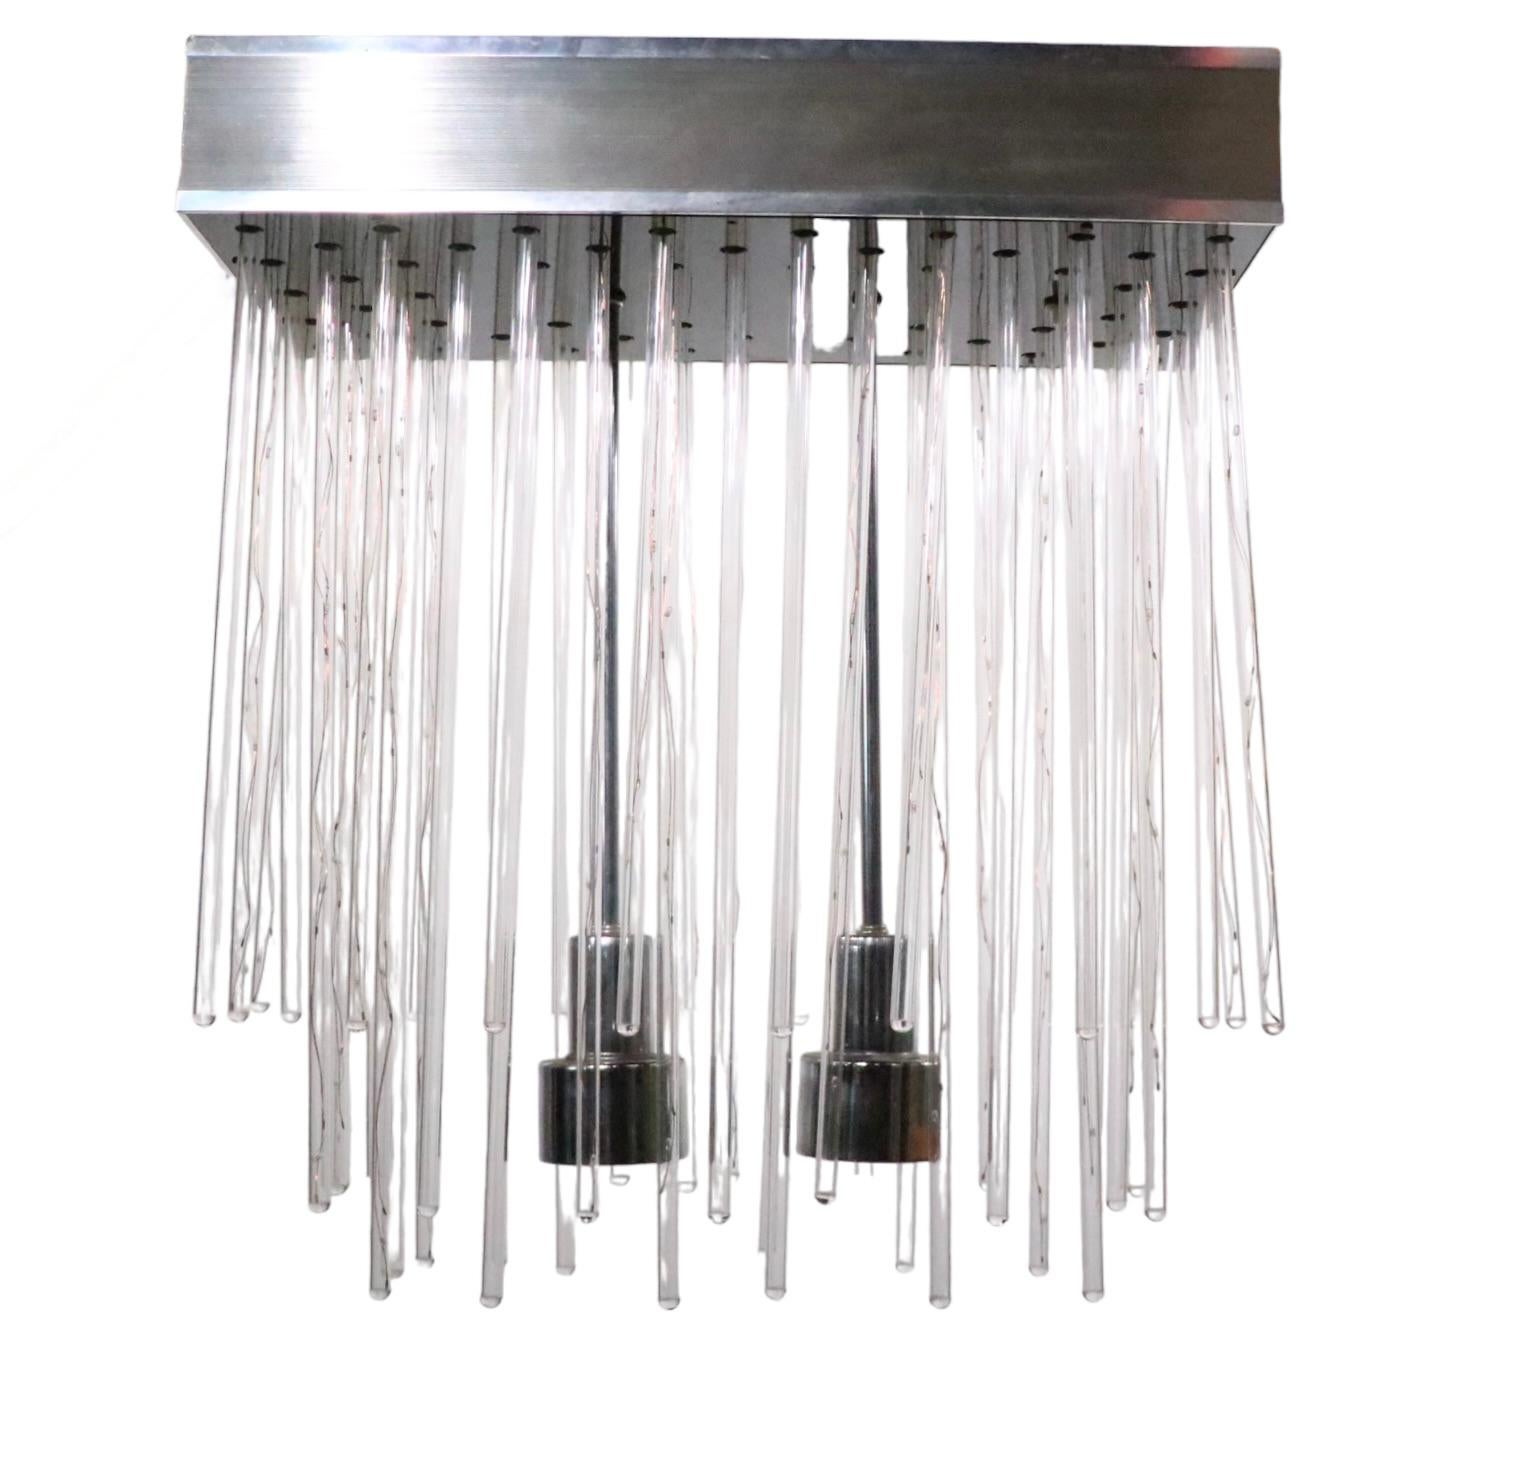 Incredible 1970’s fixture having ( 53 ) lucite rods that  are suspended from the rectangular metal box, which mounts directly to the ceiling. Some lucite tubes contain a filliment, making them illuminate, some do not have the filliment, this is by